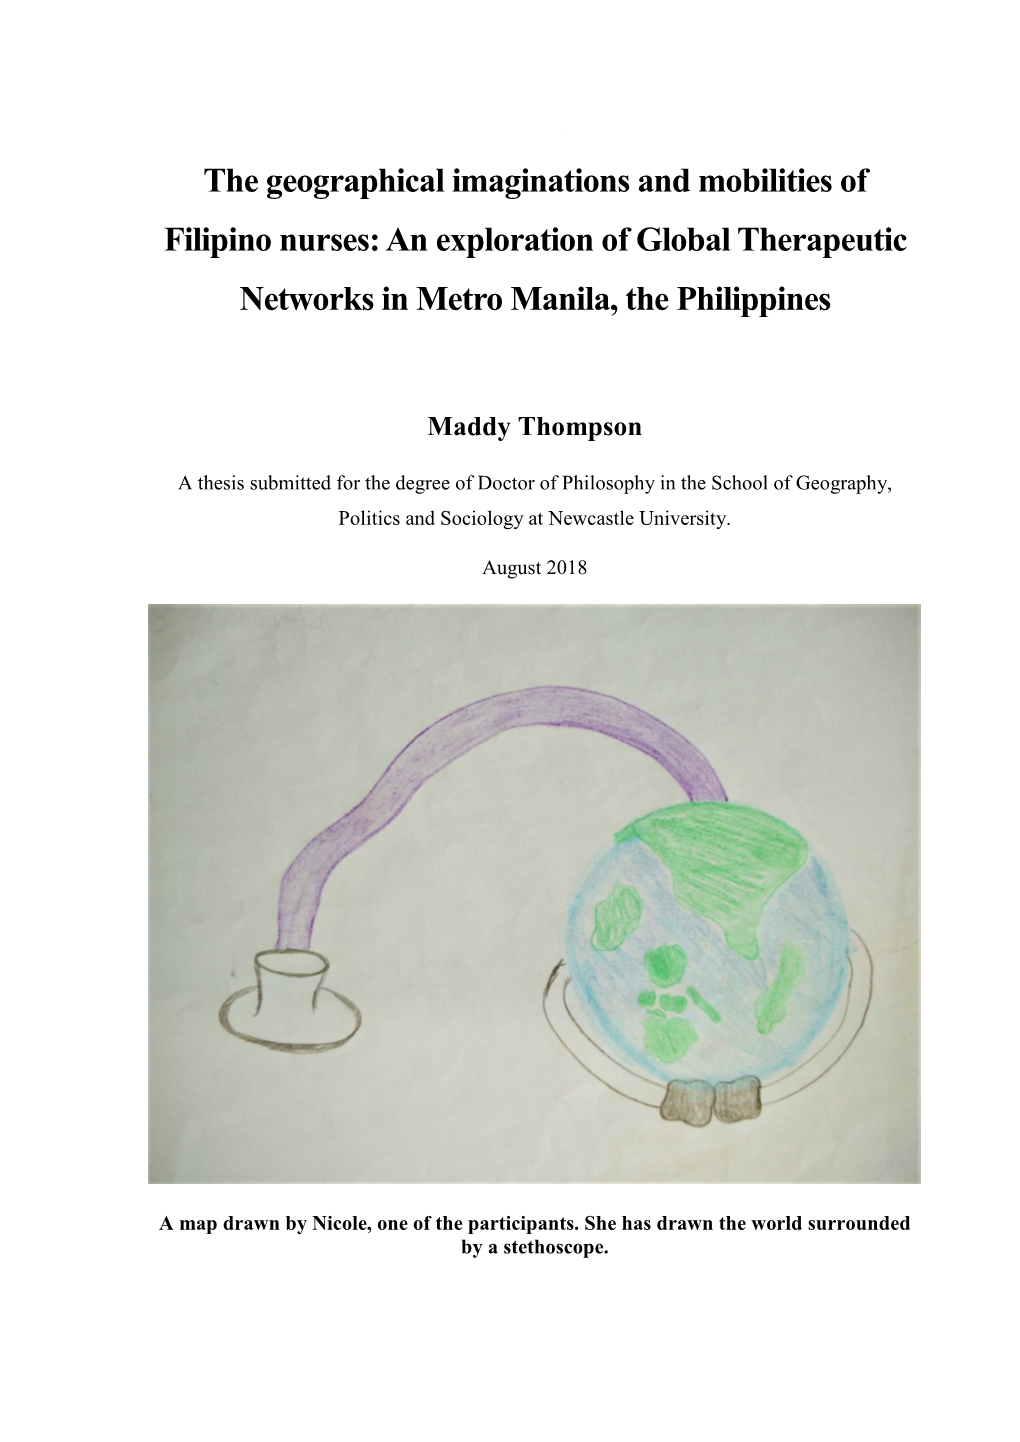 The Geographical Imaginations and Mobilities of Filipino Nurses: an Exploration of Global Therapeutic Networks in Metro Manila, the Philippines